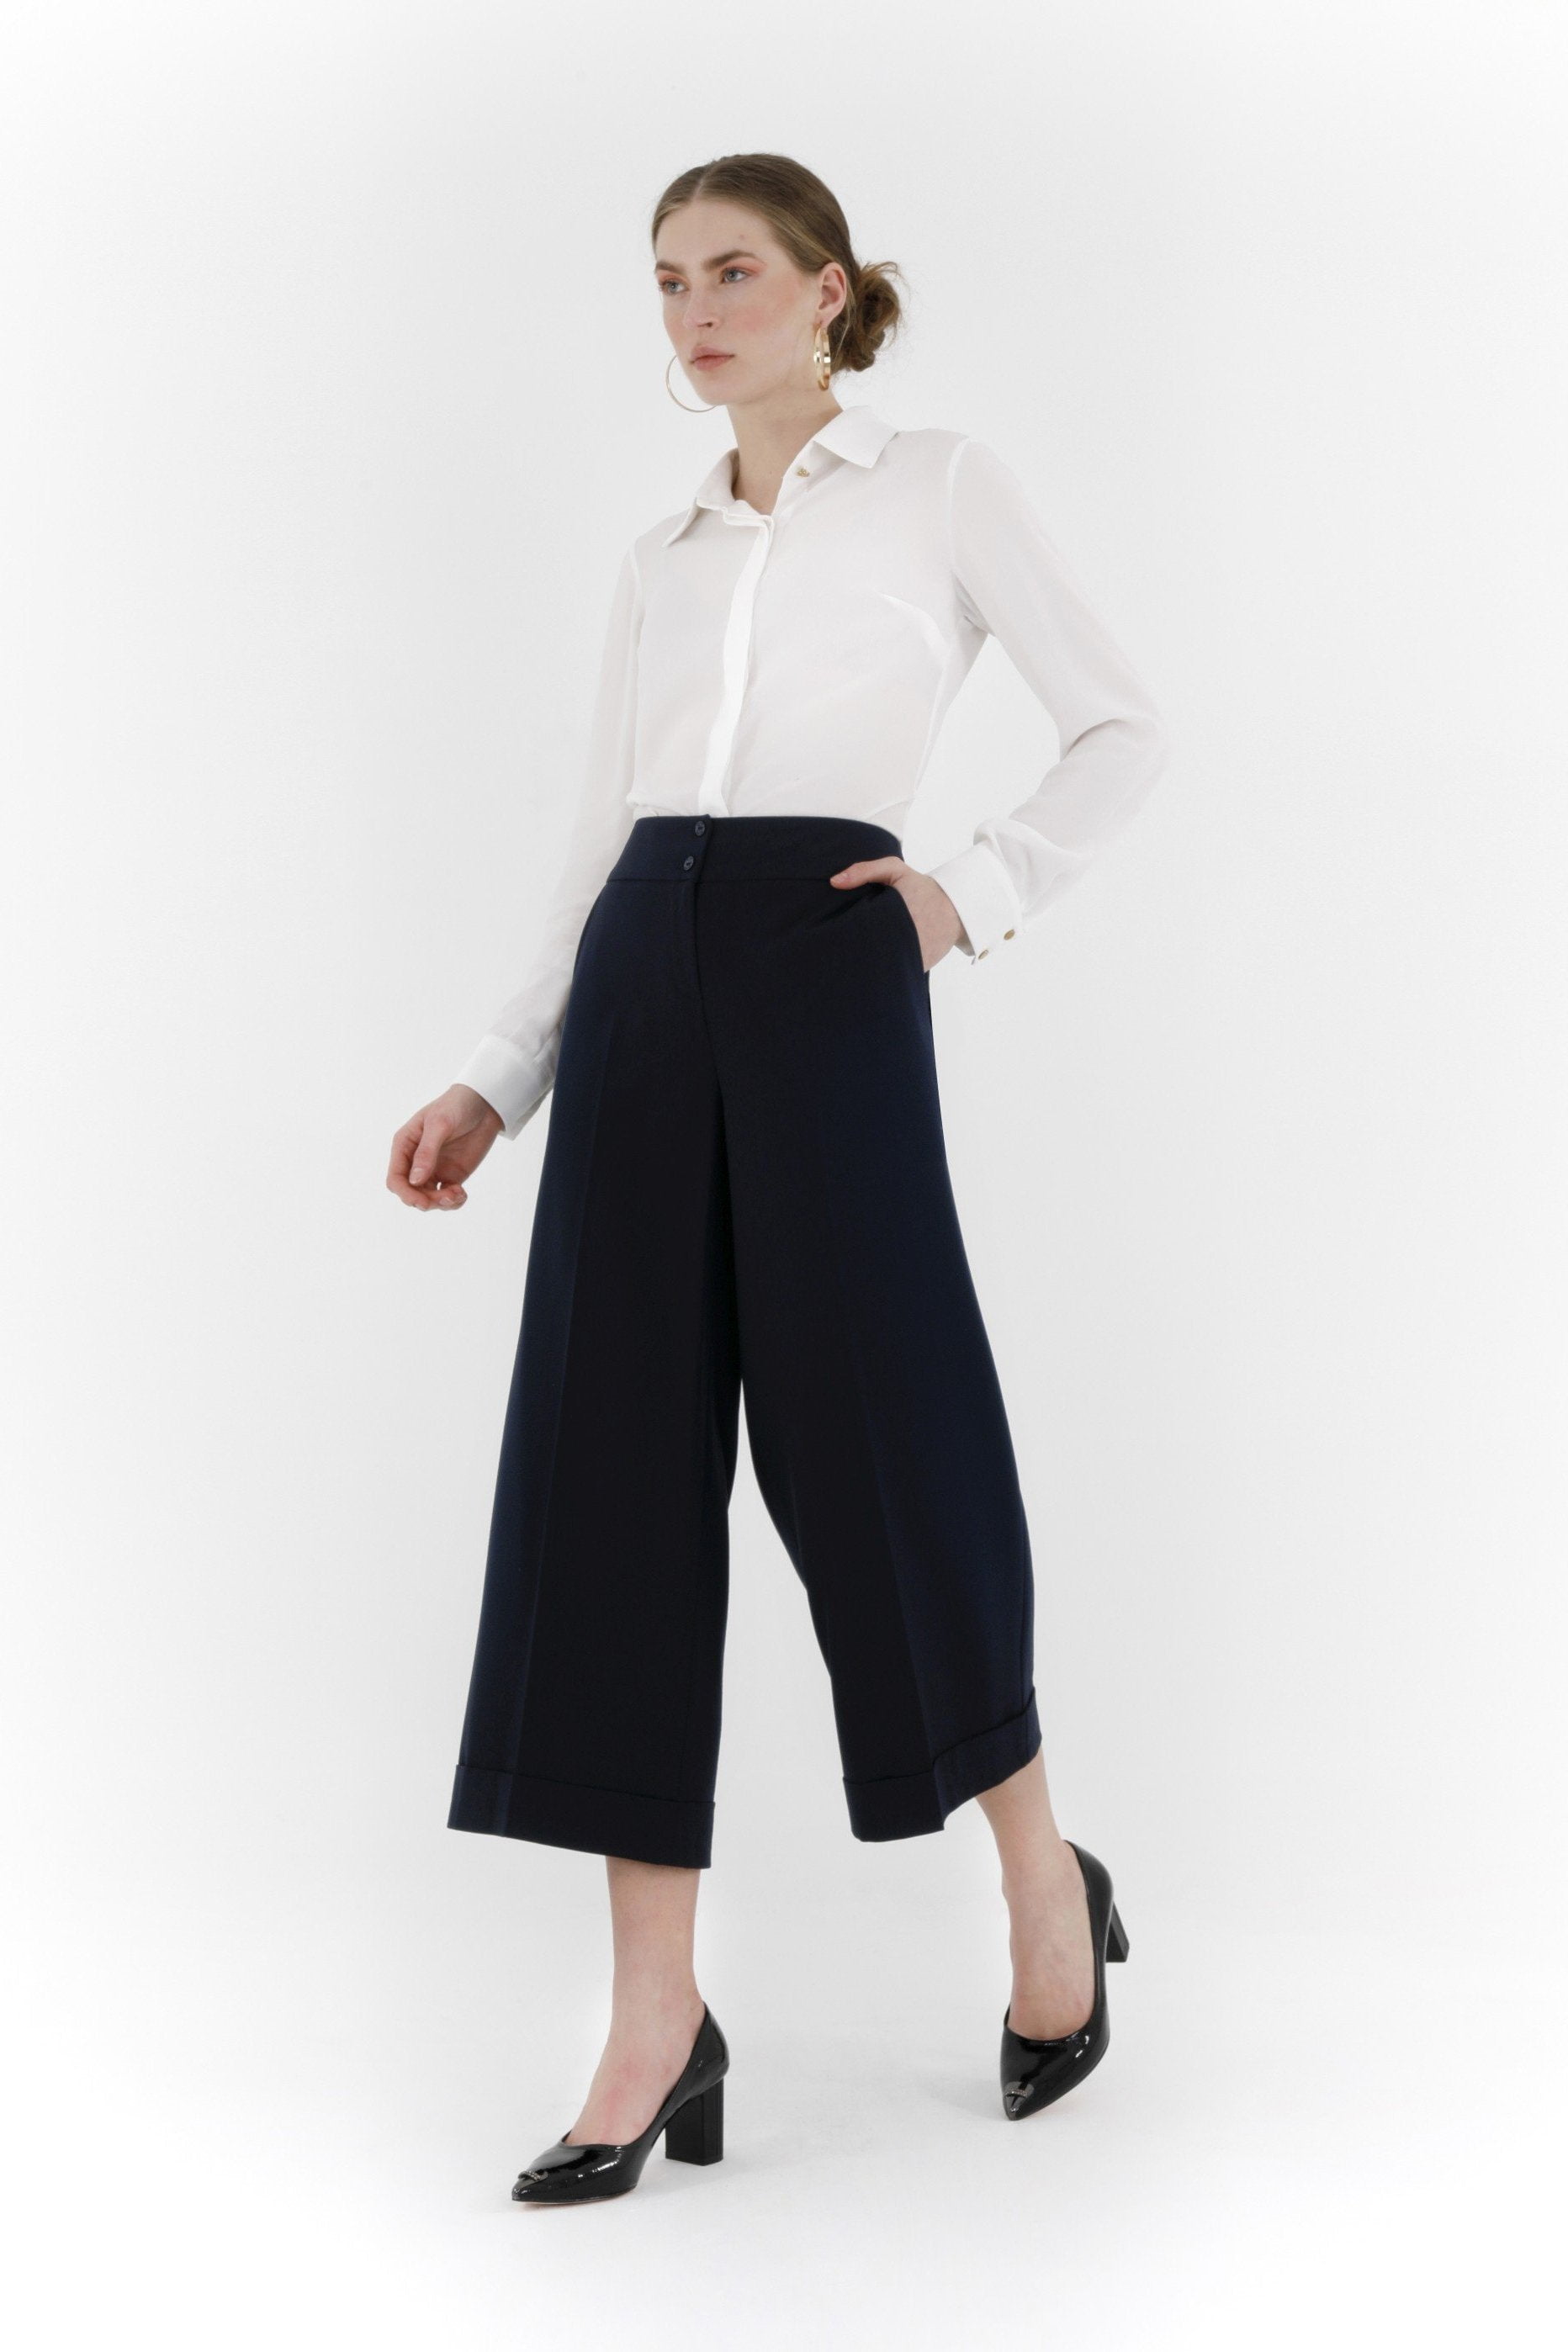 how to wear cropped dress pants in winter